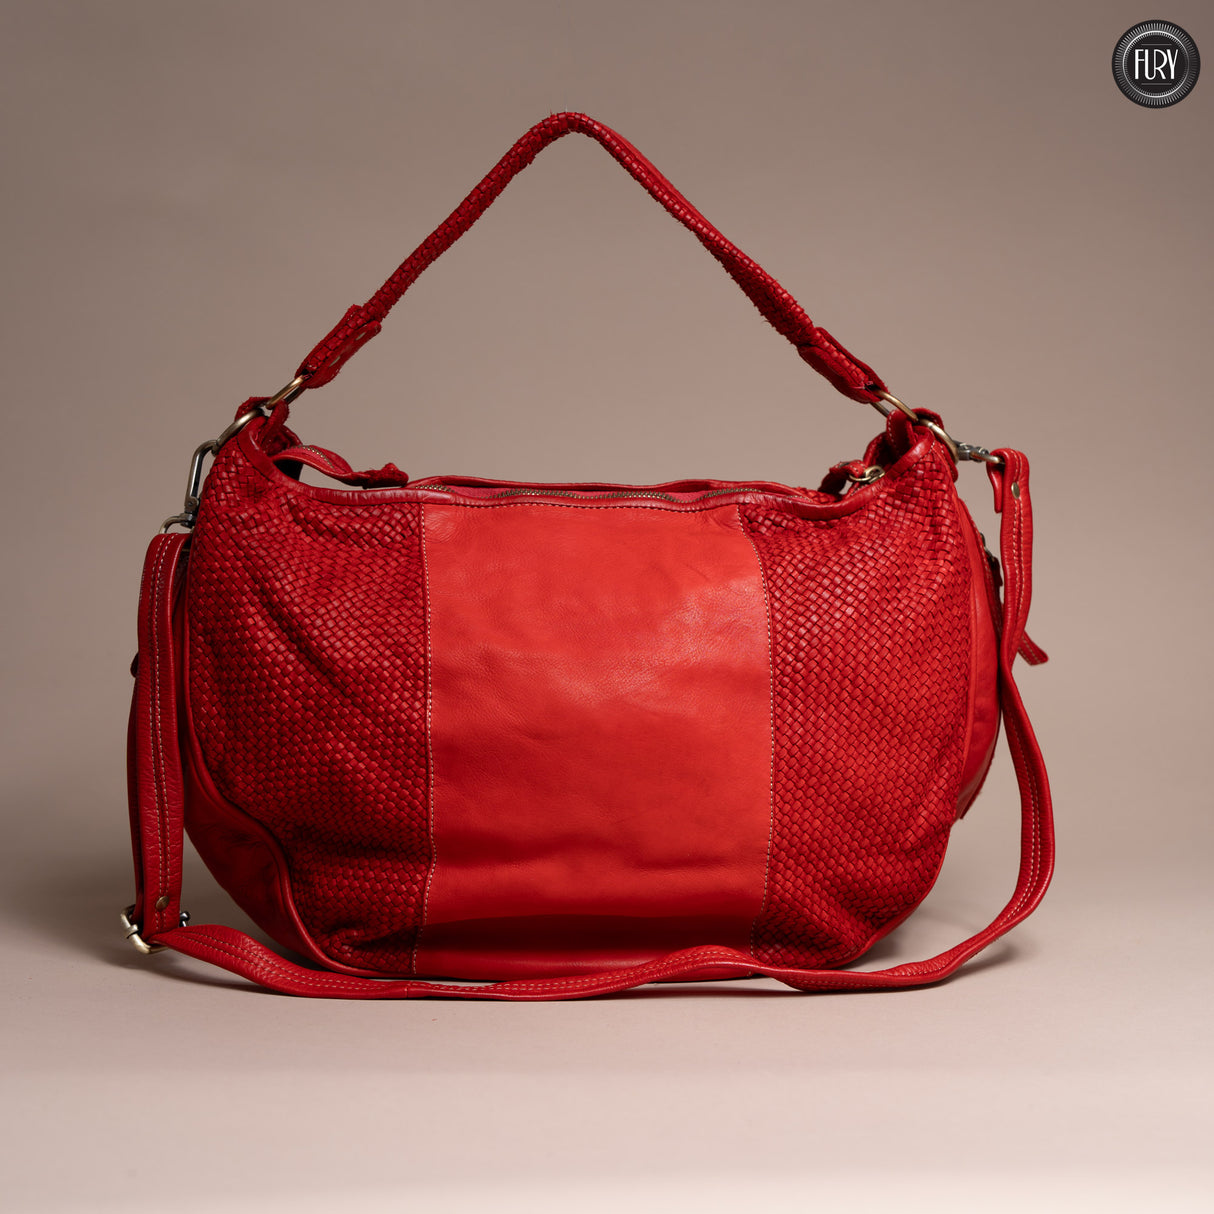 Beatrice bag in woven leather